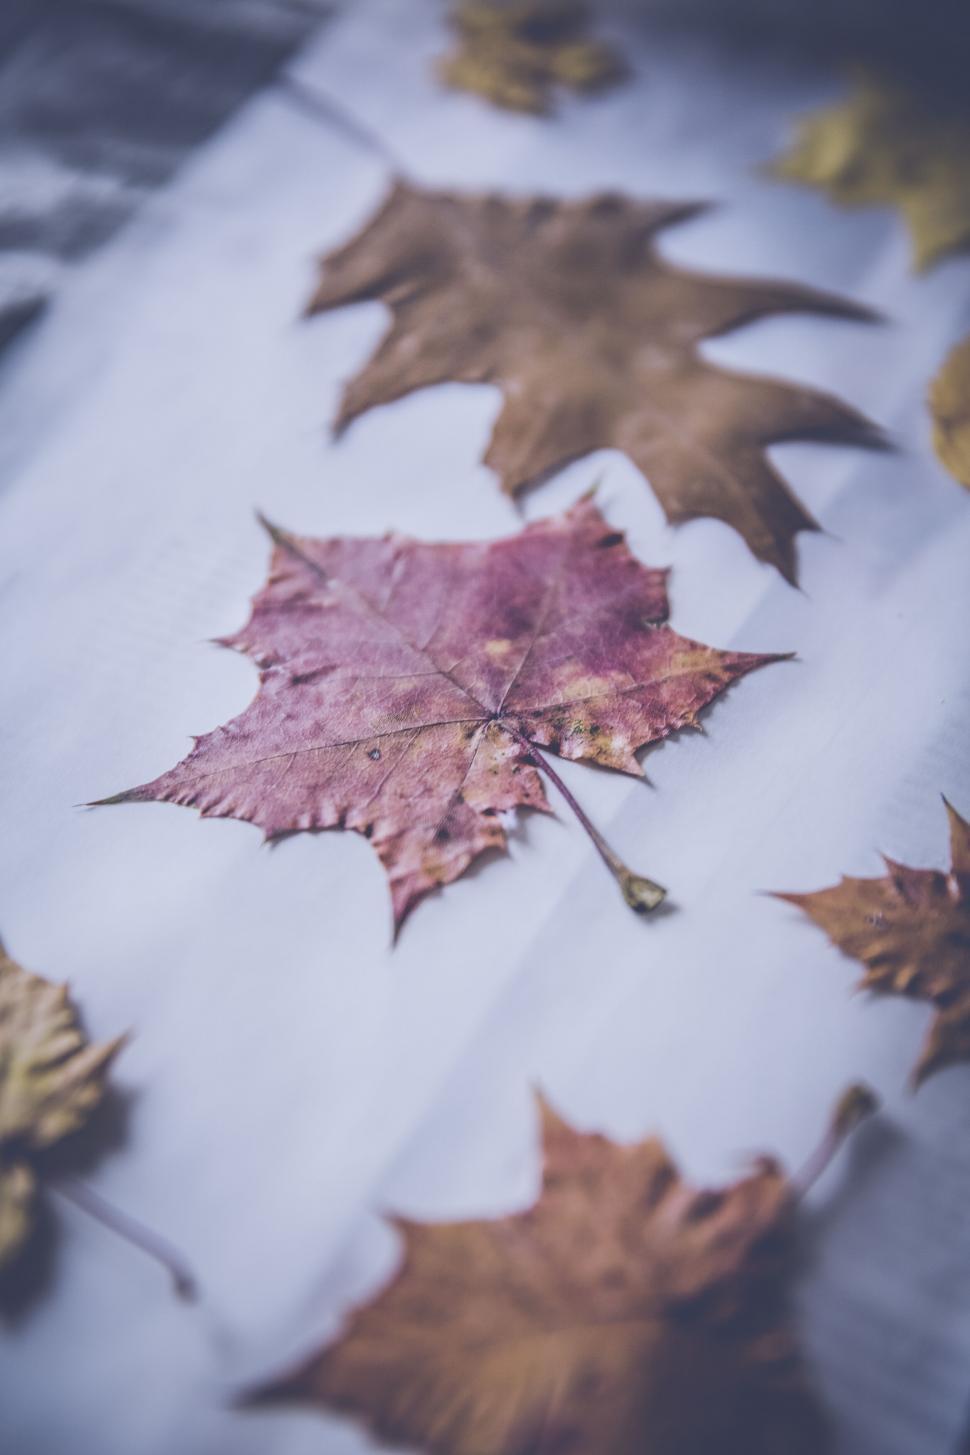 Free Image of Autumn leaves on a wooden background 